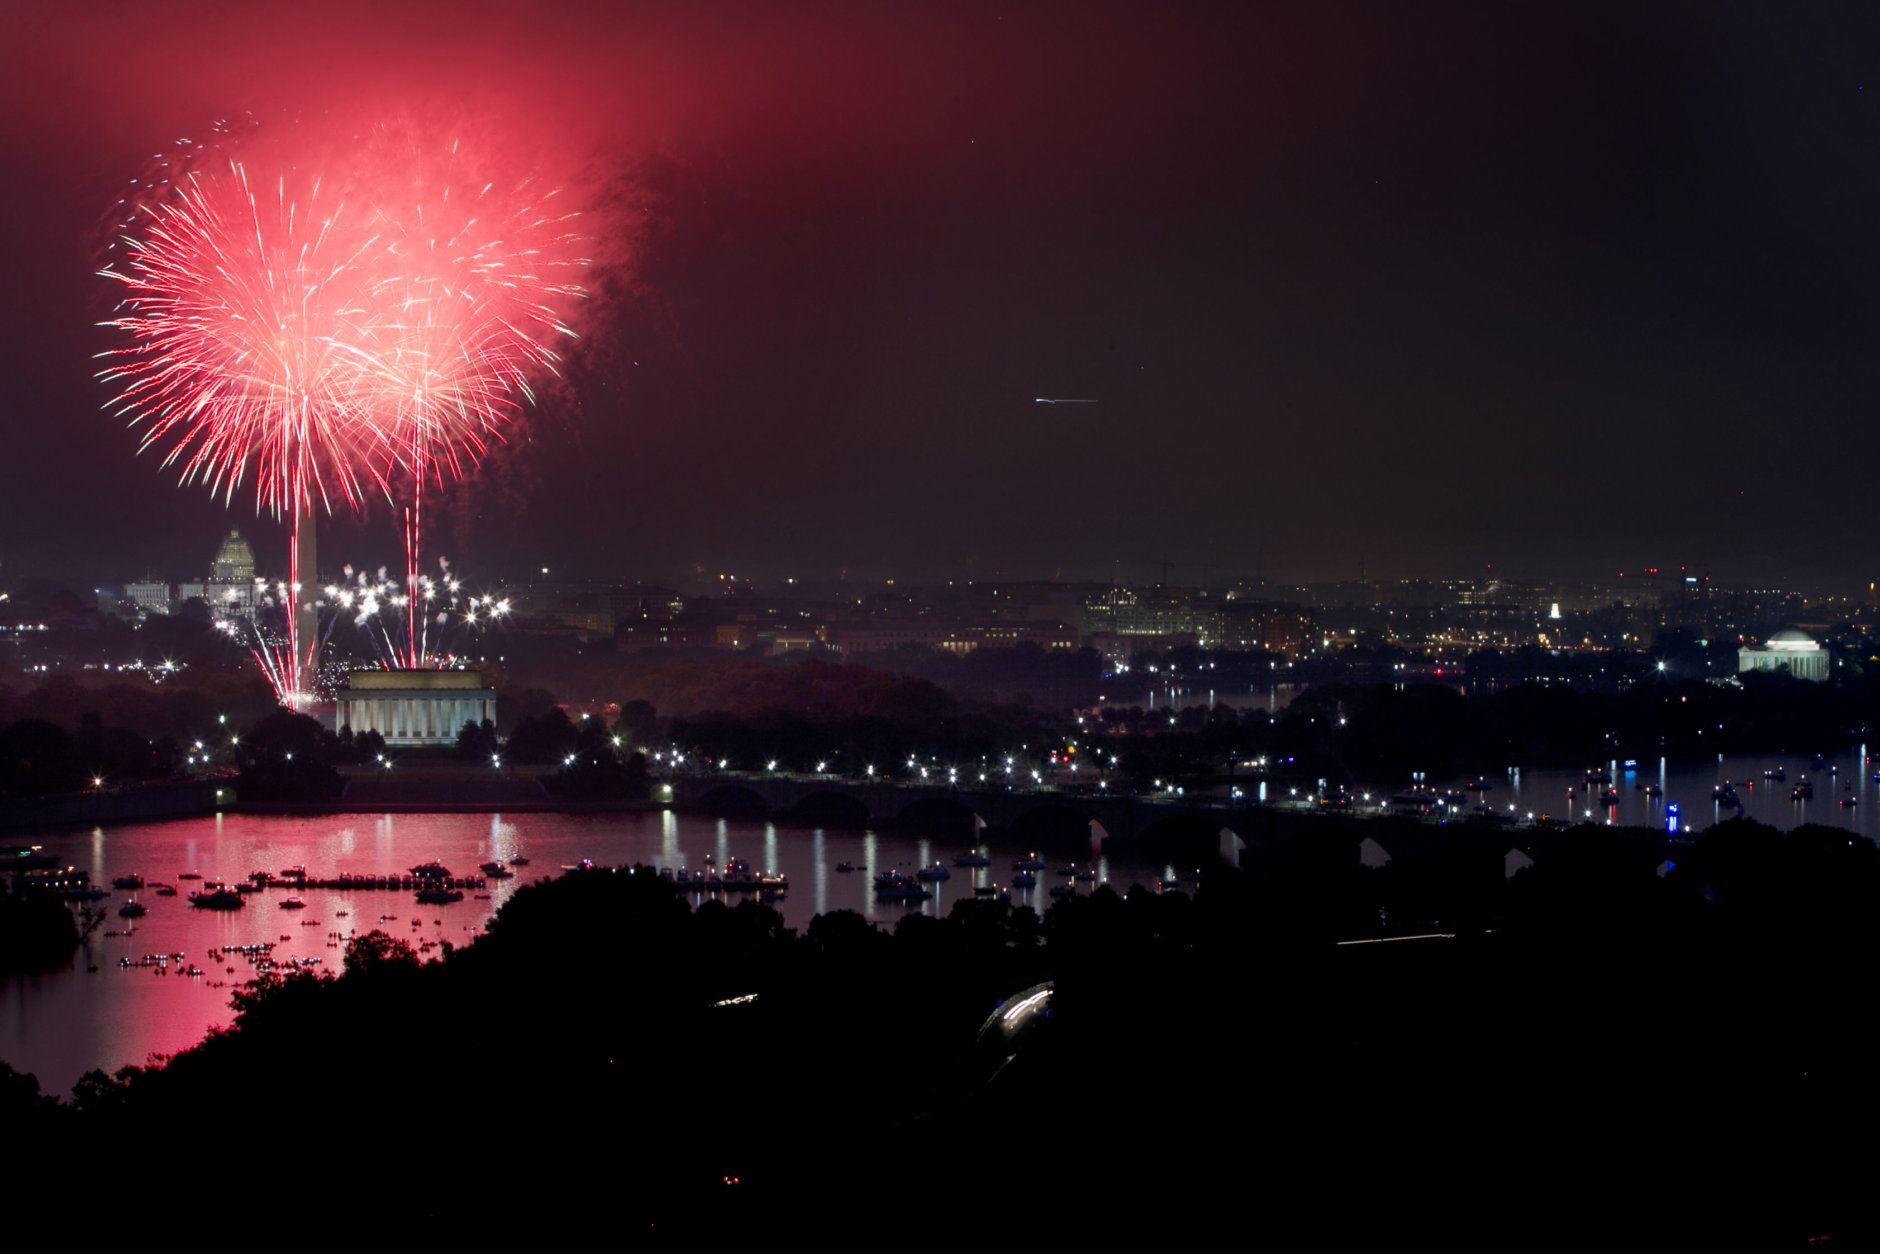 Fireworks explode over the National Mall for Fourth of July celebrations in Washington, photographed from Arlington, Va., on Saturday, July 4, 2015. (AP Photo/Jacquelyn Martin)